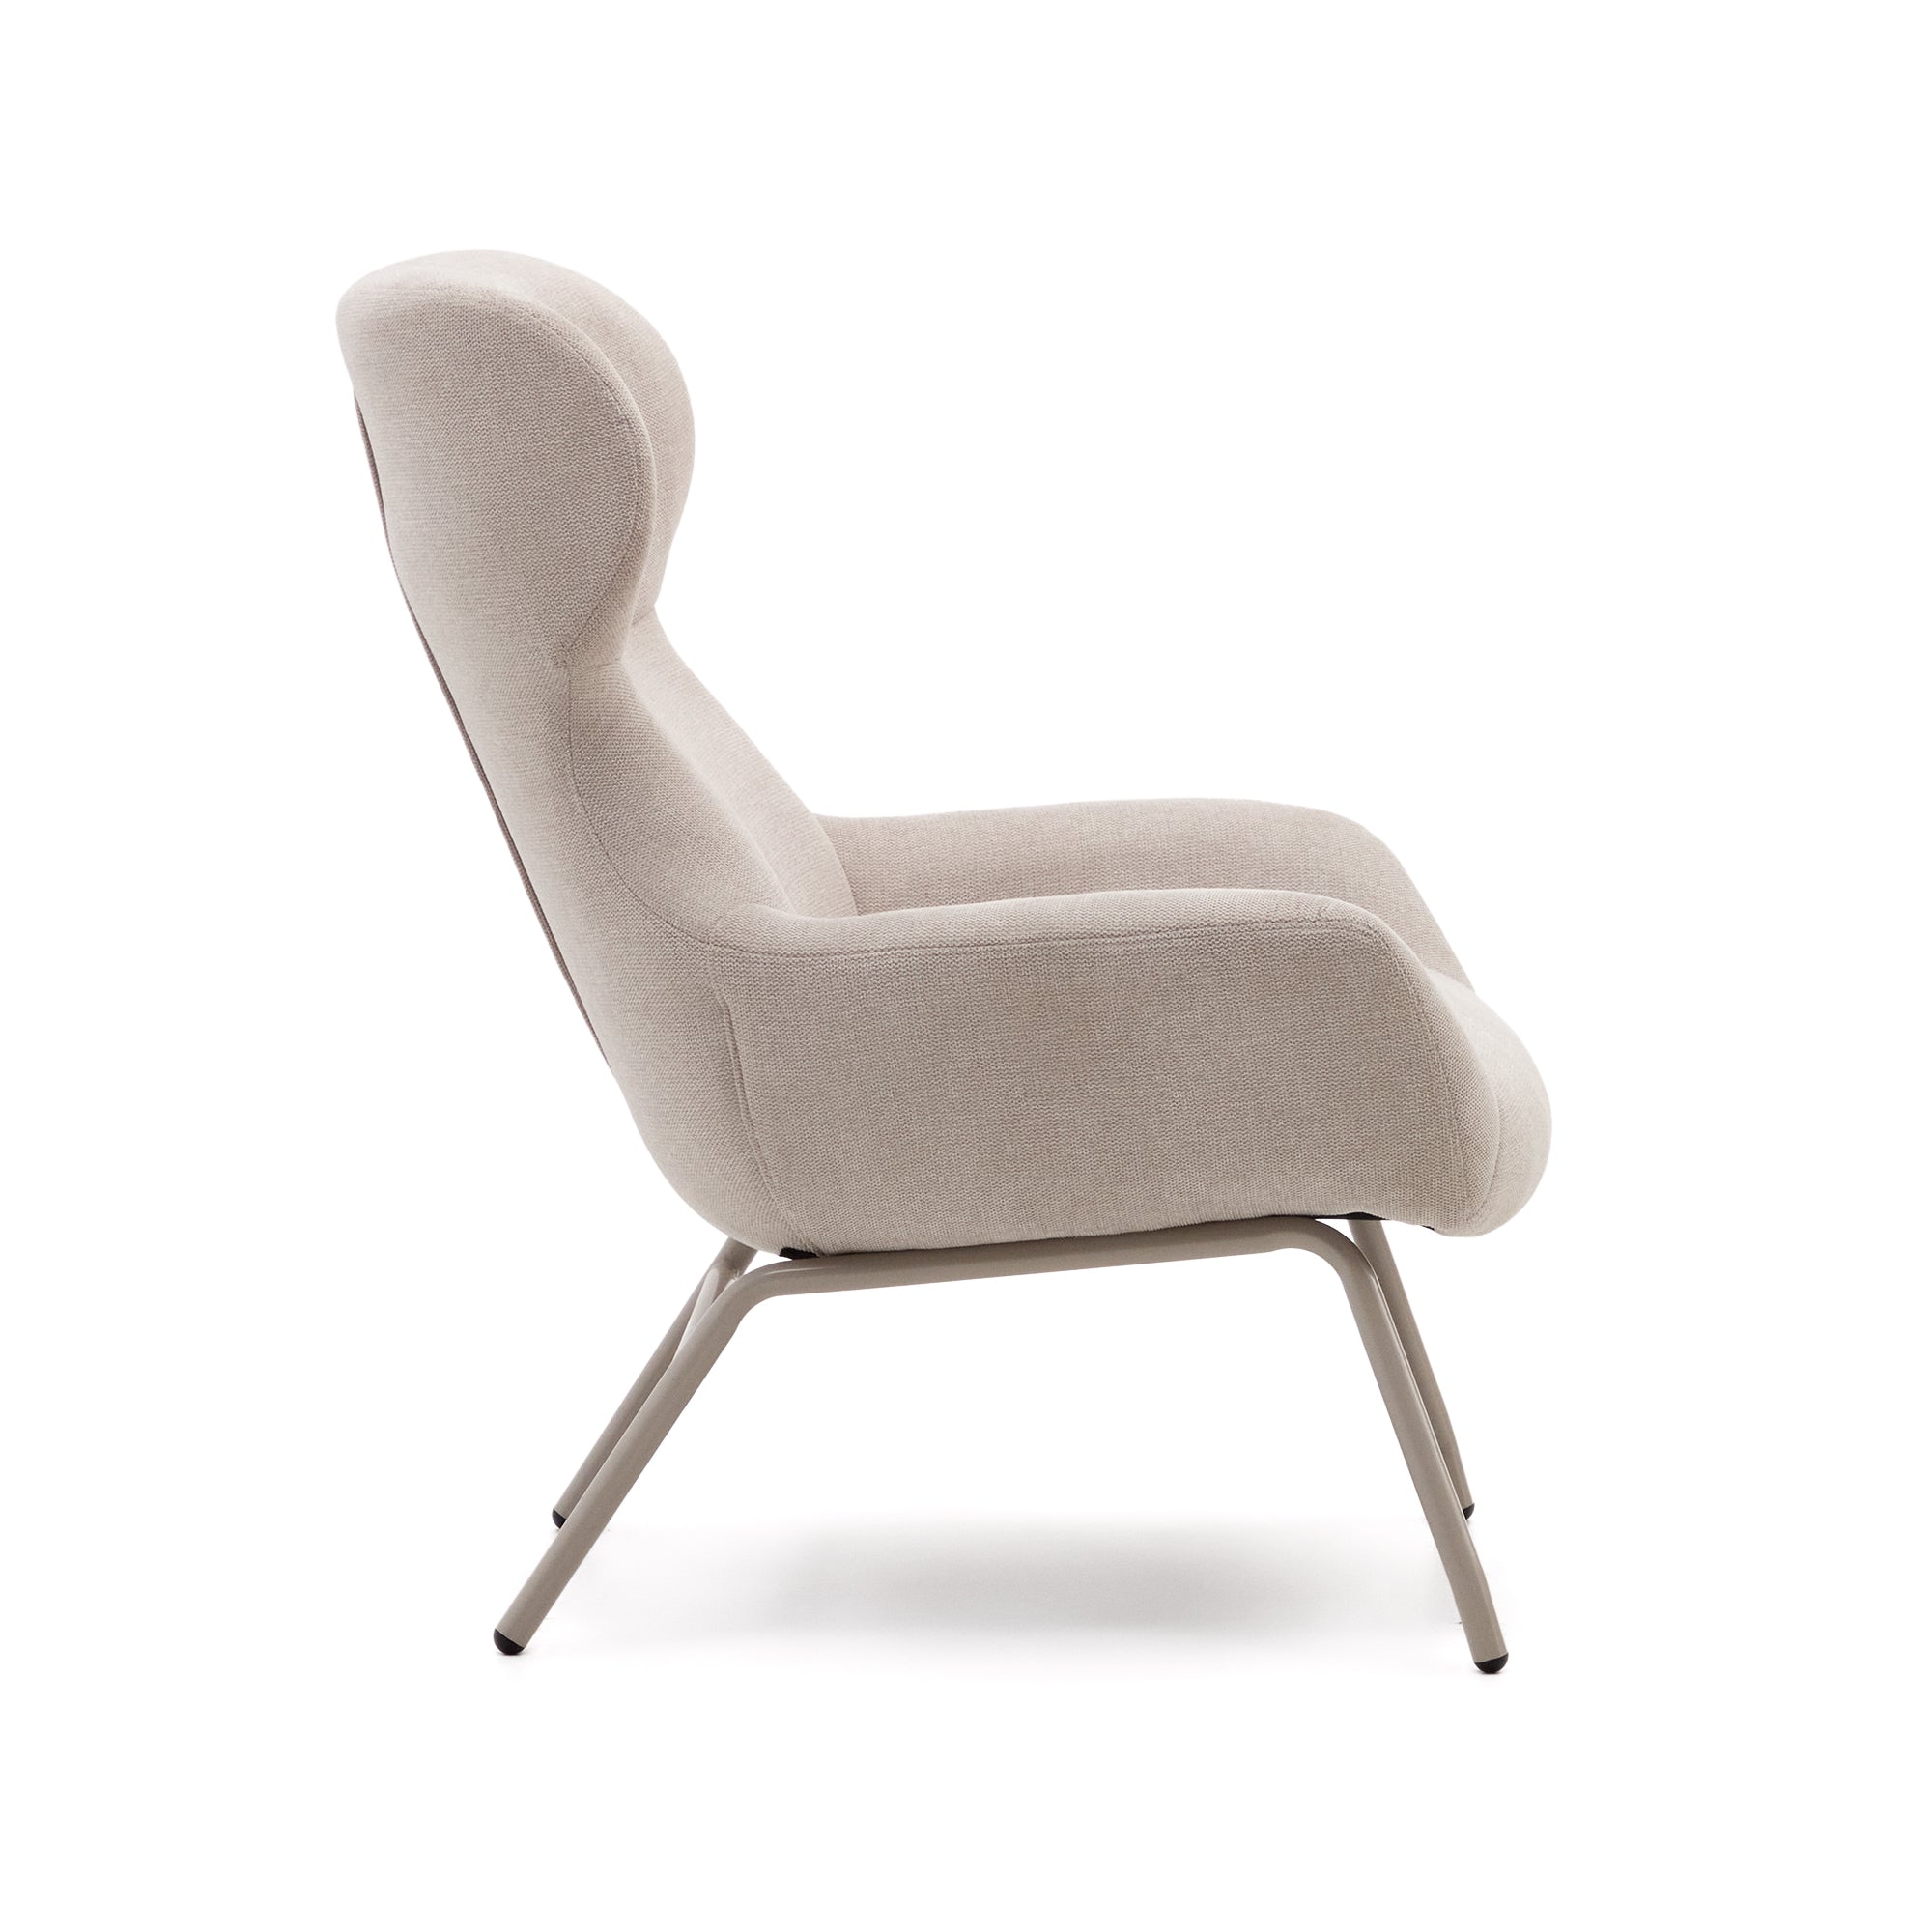 Belina chenille armchair in beige and steel with white finish